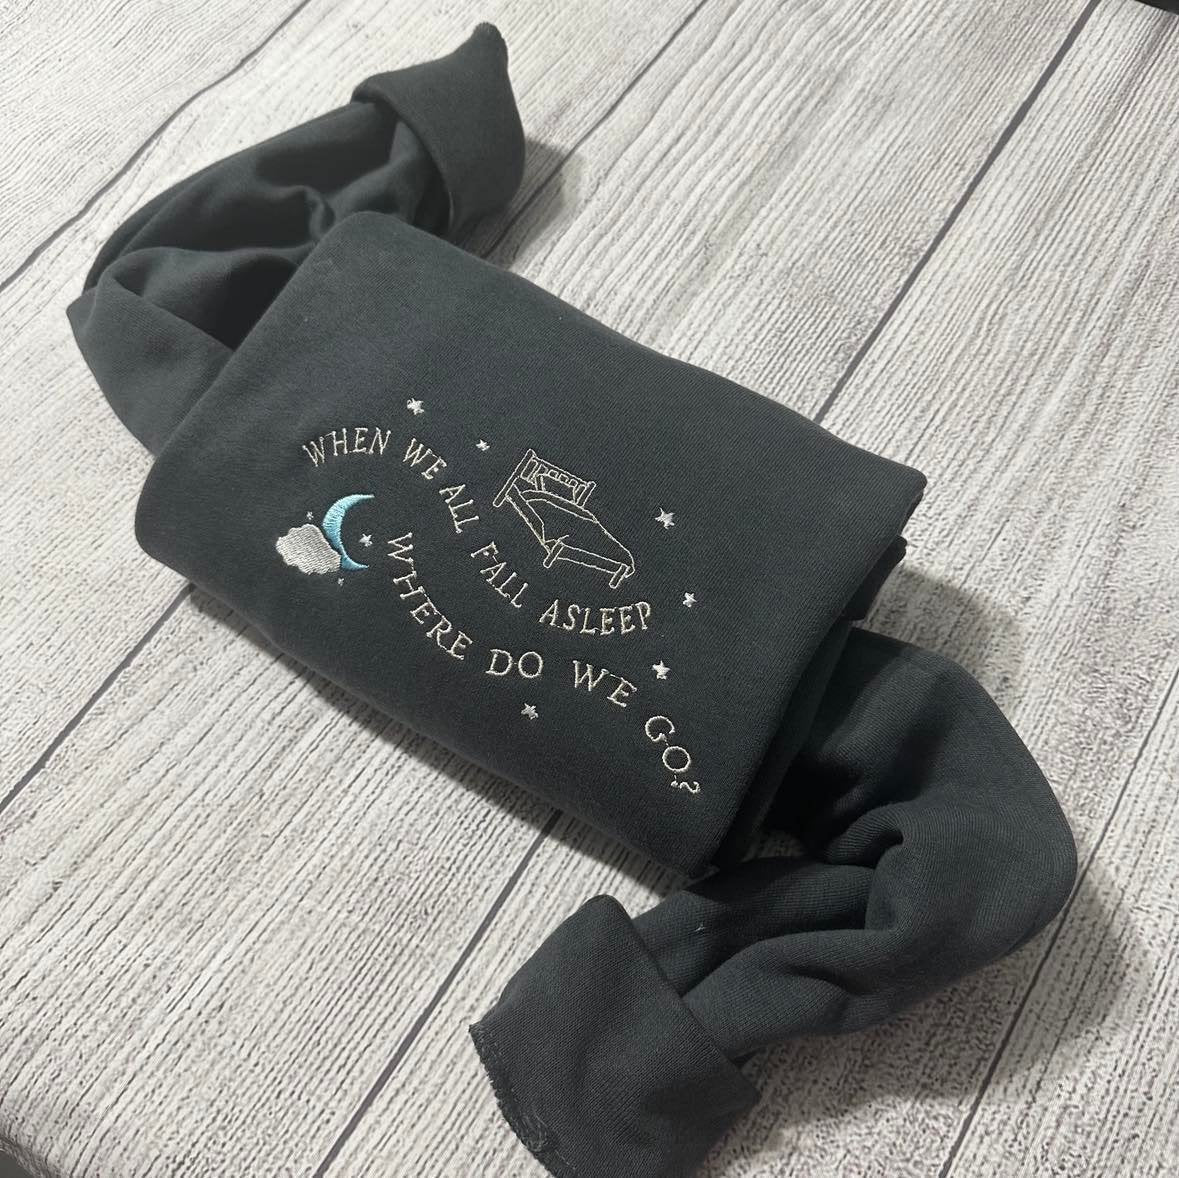 when we all fall a sleep where so we go? custom embroidered sweatshirt; fall a sleep embroidered crewneck; gift for her embroidered sweater - MrEmbroideryGifts